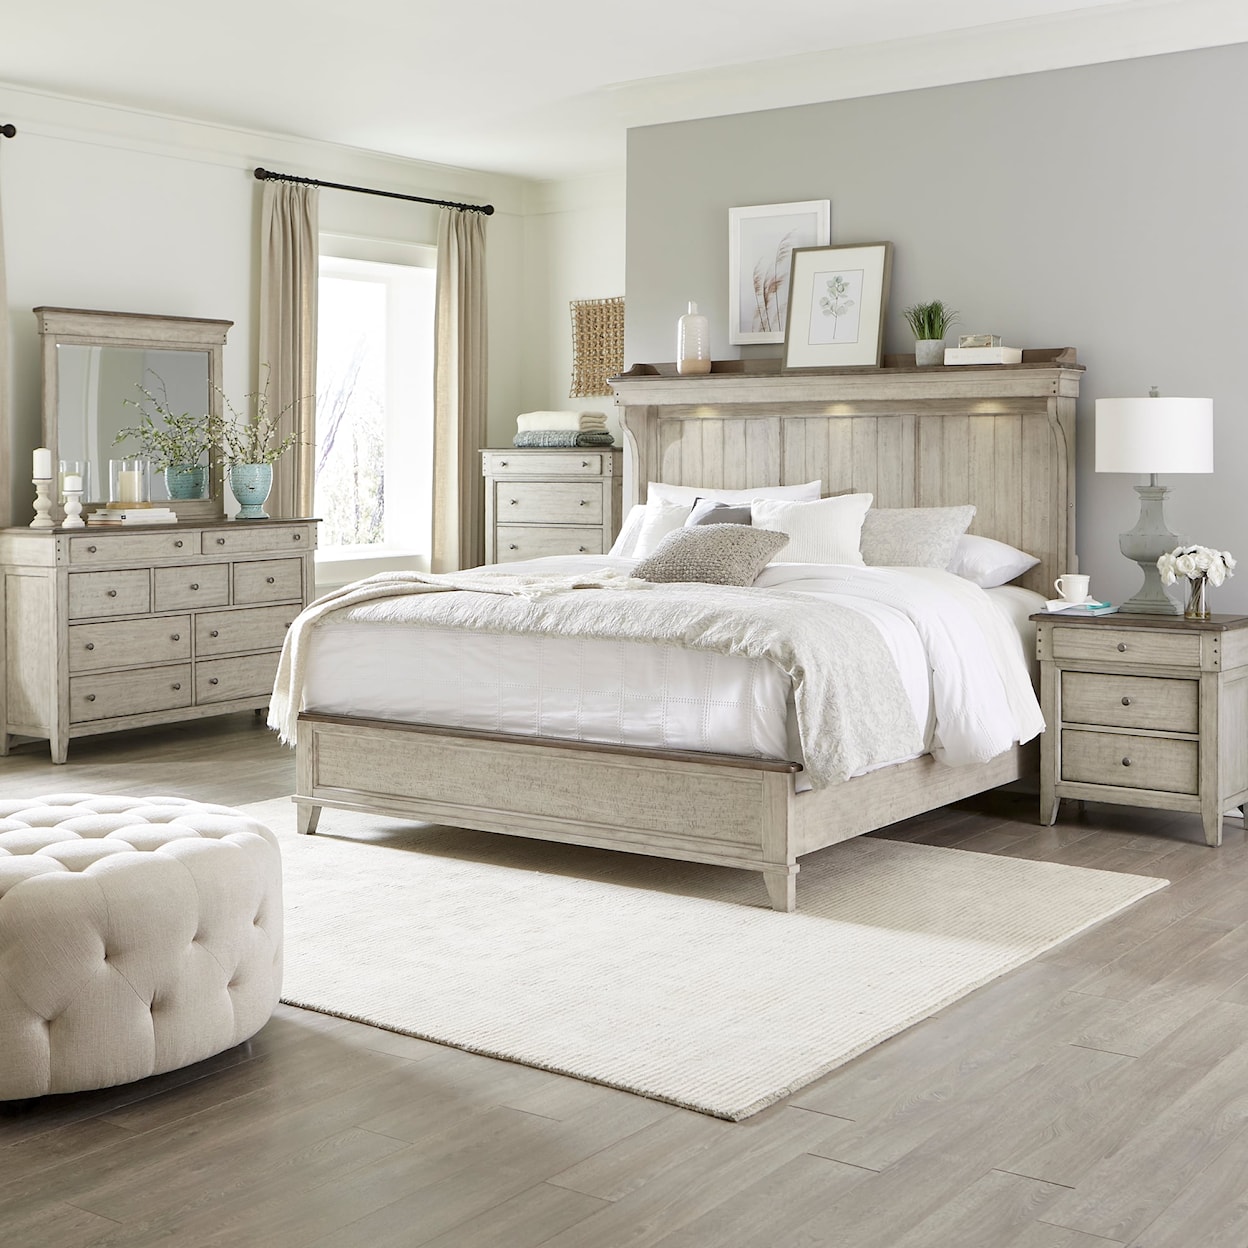 Libby Ivy Hollow 5-Piece King Mantle Bedroom Set